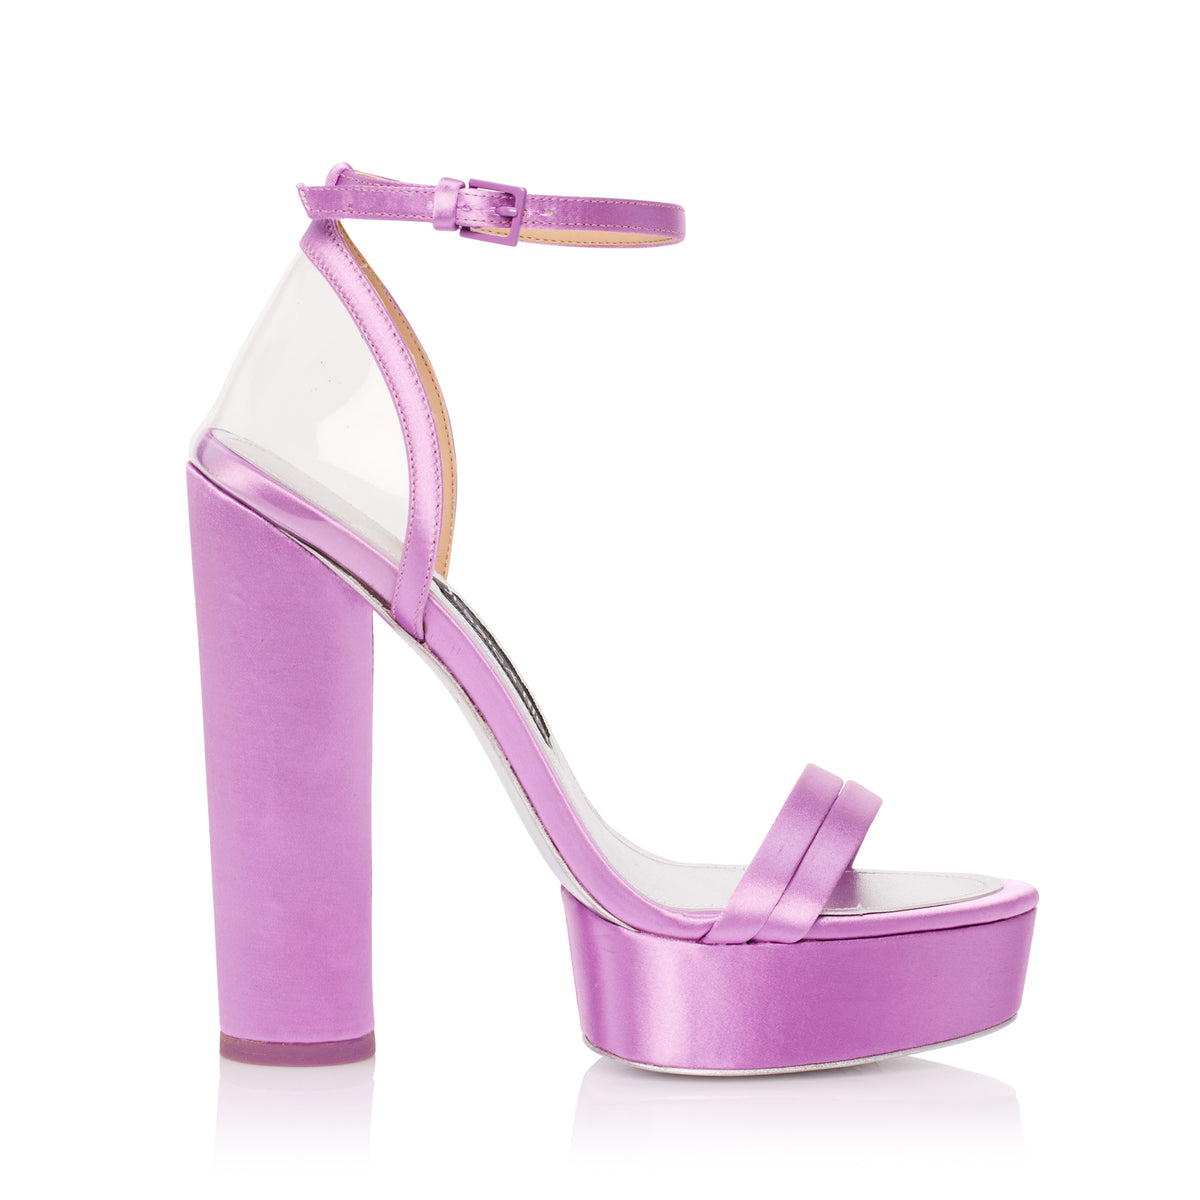 Profile of the Platform Sandal luxury shoes from Jessica Rich in lavender.